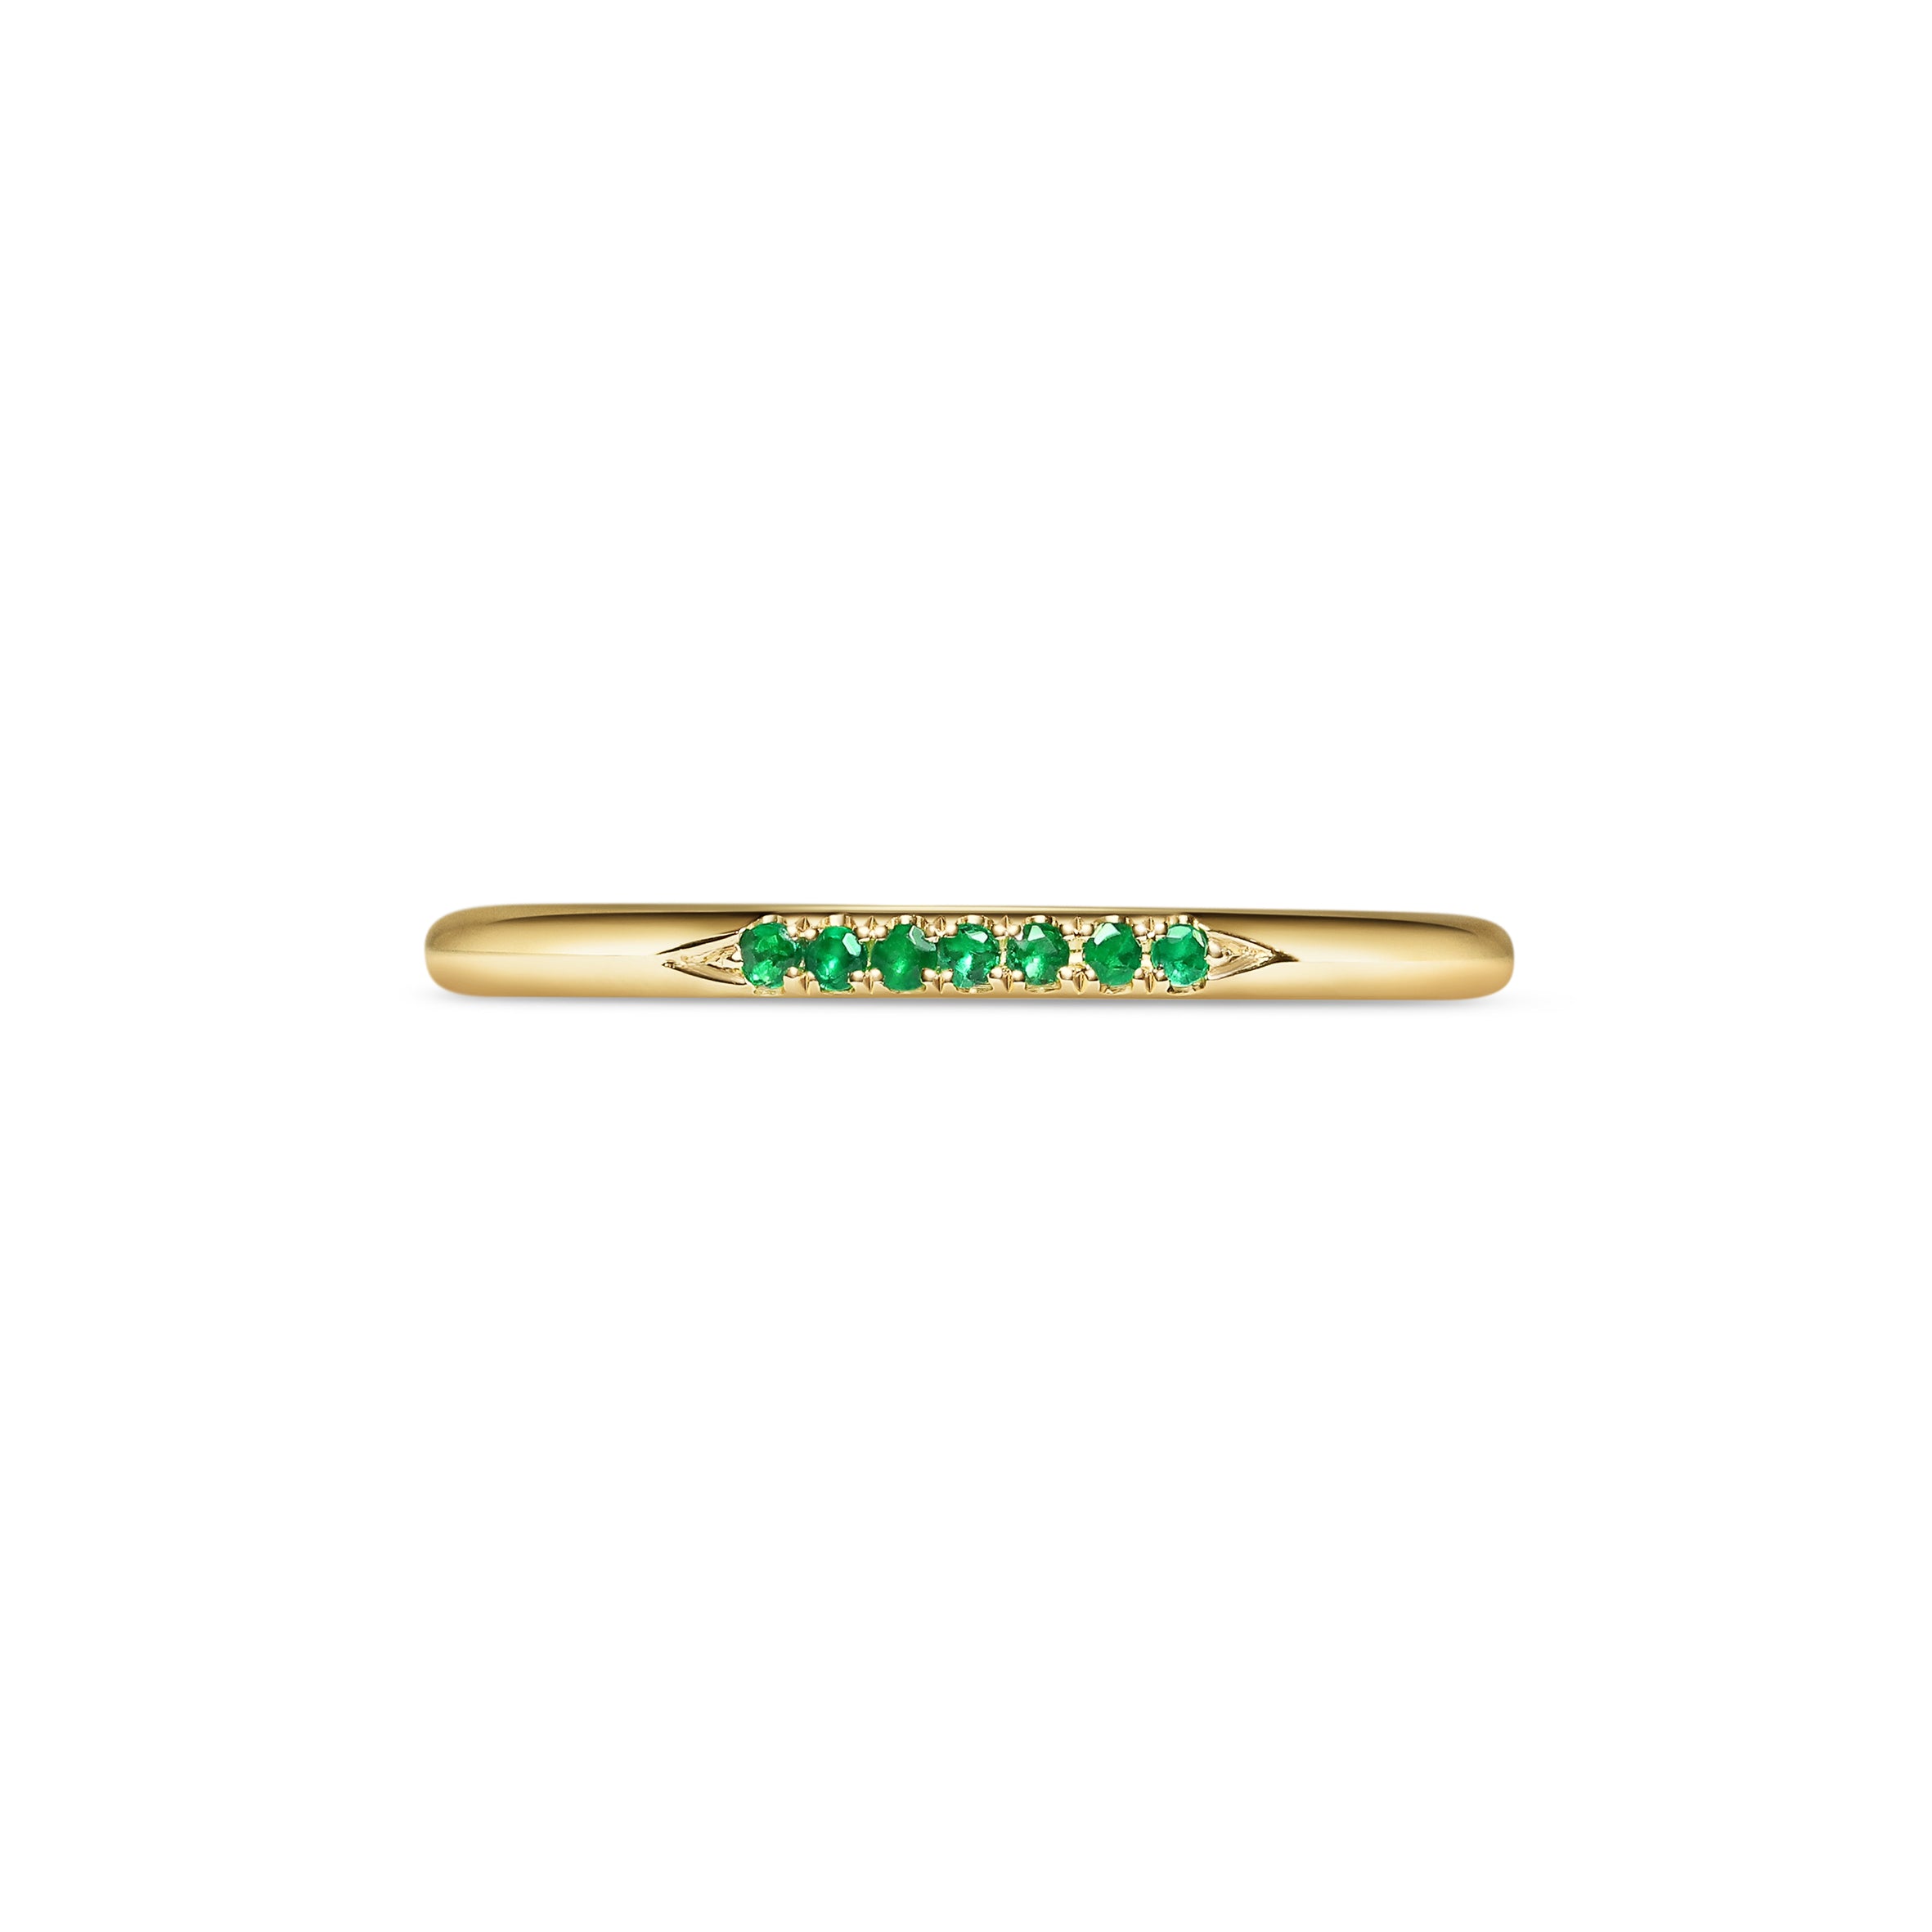 The Skinny Stone Band - Emeralds by East London jeweller Rachel Boston | Discover our collections of unique and timeless engagement rings, wedding rings, and modern fine jewellery.